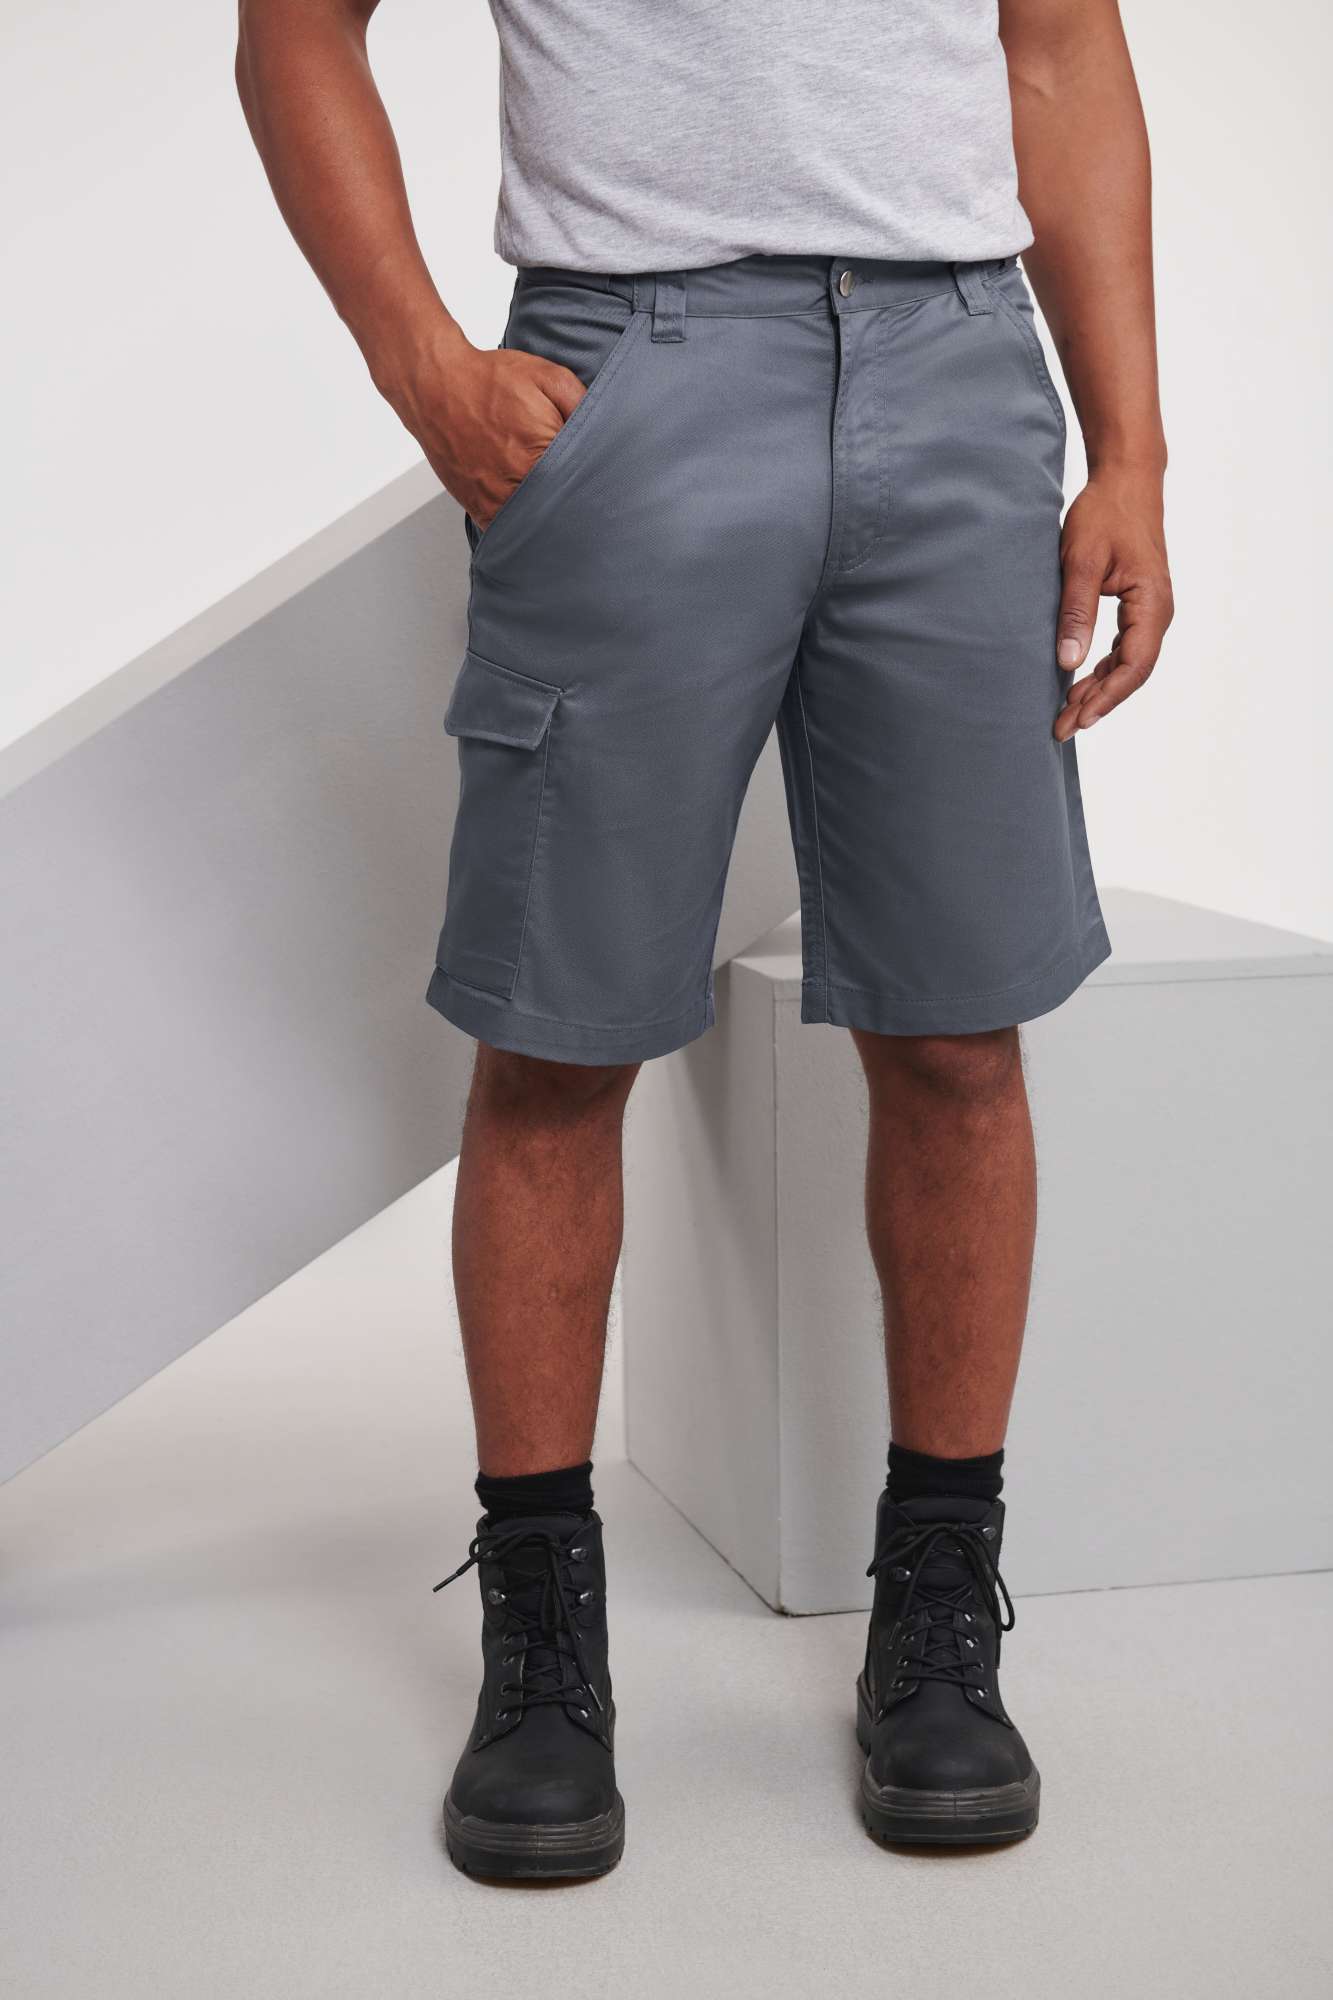 Russell Workwear Polycotton Twill Shorts Convoy Grey (Solid) 42 (Z002)